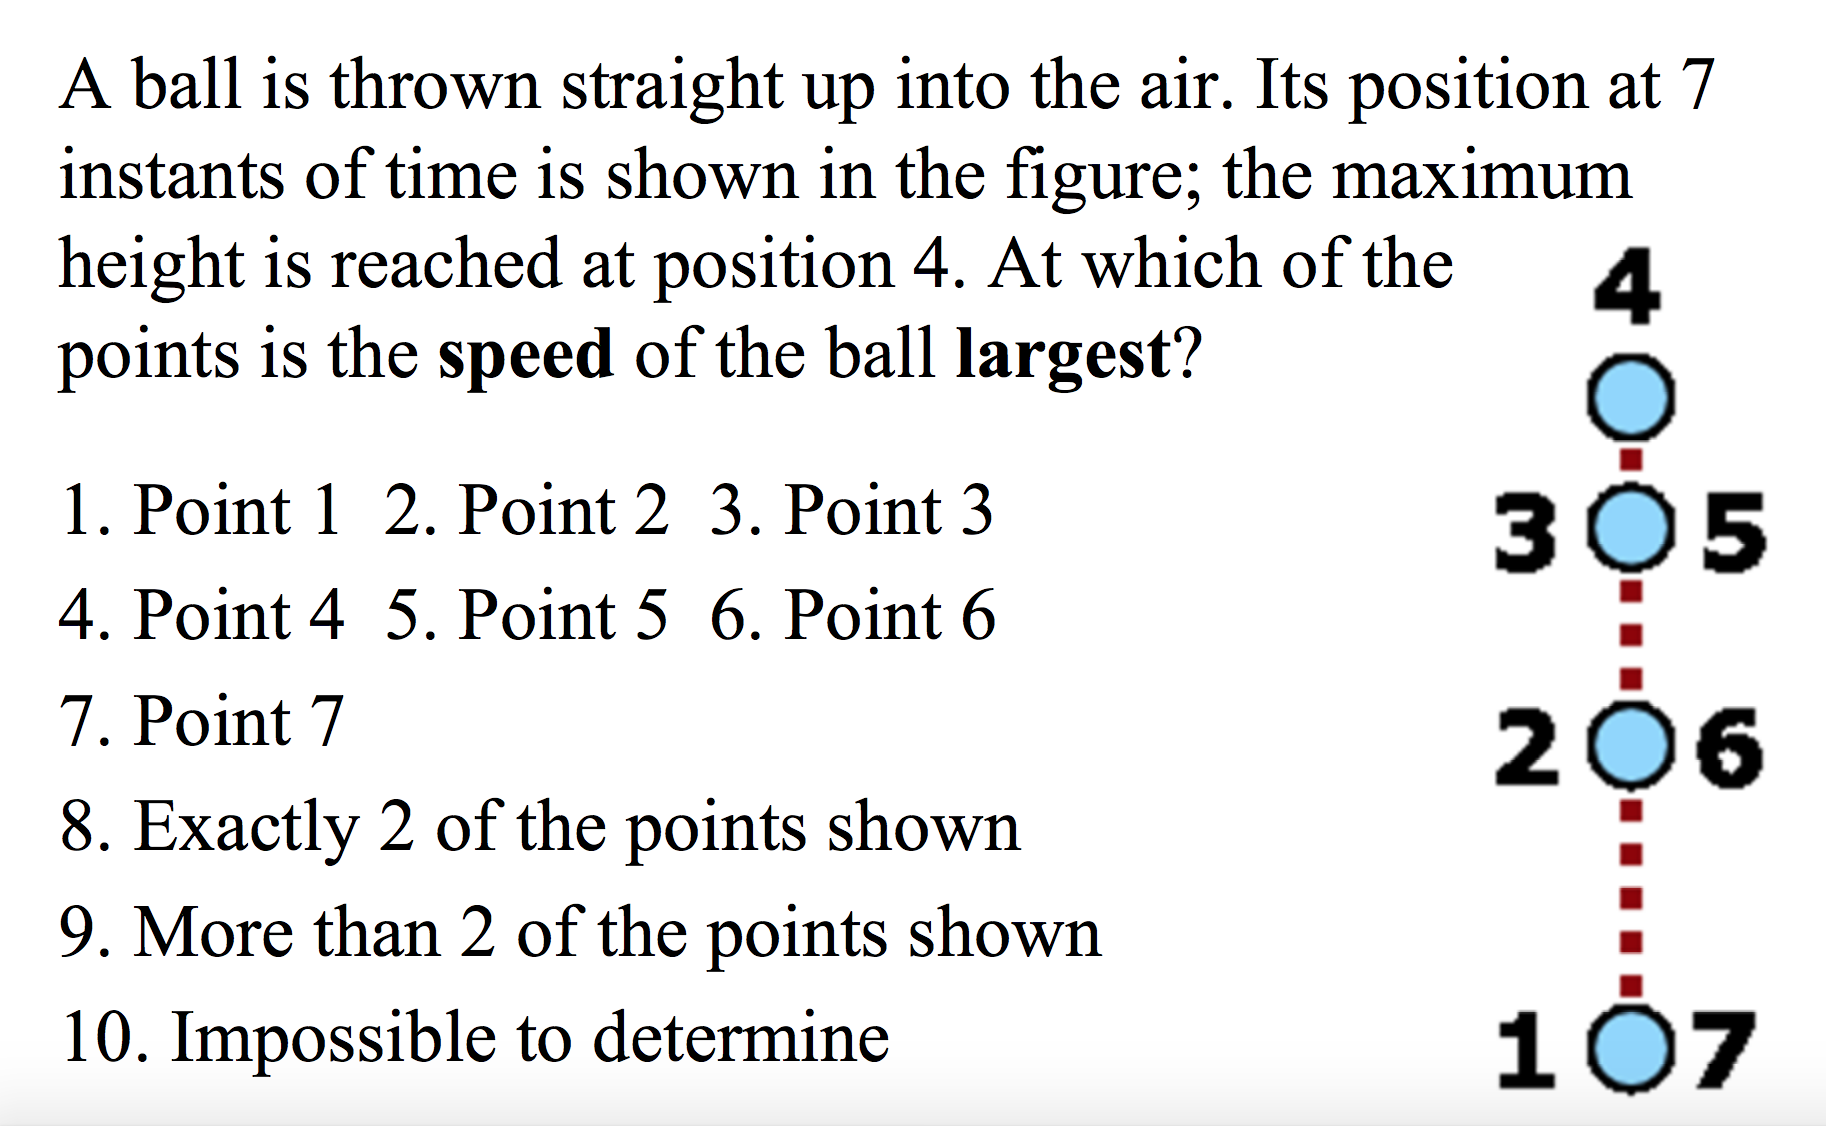 A ball is thrown straight up into the air. Its position at 7
instants of time is shown in the figure; the maximum
height is reached at position 4. At which of the
points is the speed of the ball largest?
4
1. Point 1 2. Point 2 3. Point 3
3O5
4. Point 4 5. Point 5 6. Point 6
7. Point 7
206
8. Exactly 2 of the points shown
9. More than 2 of the points shown
107
10. Impossible to determine
O-O.O
